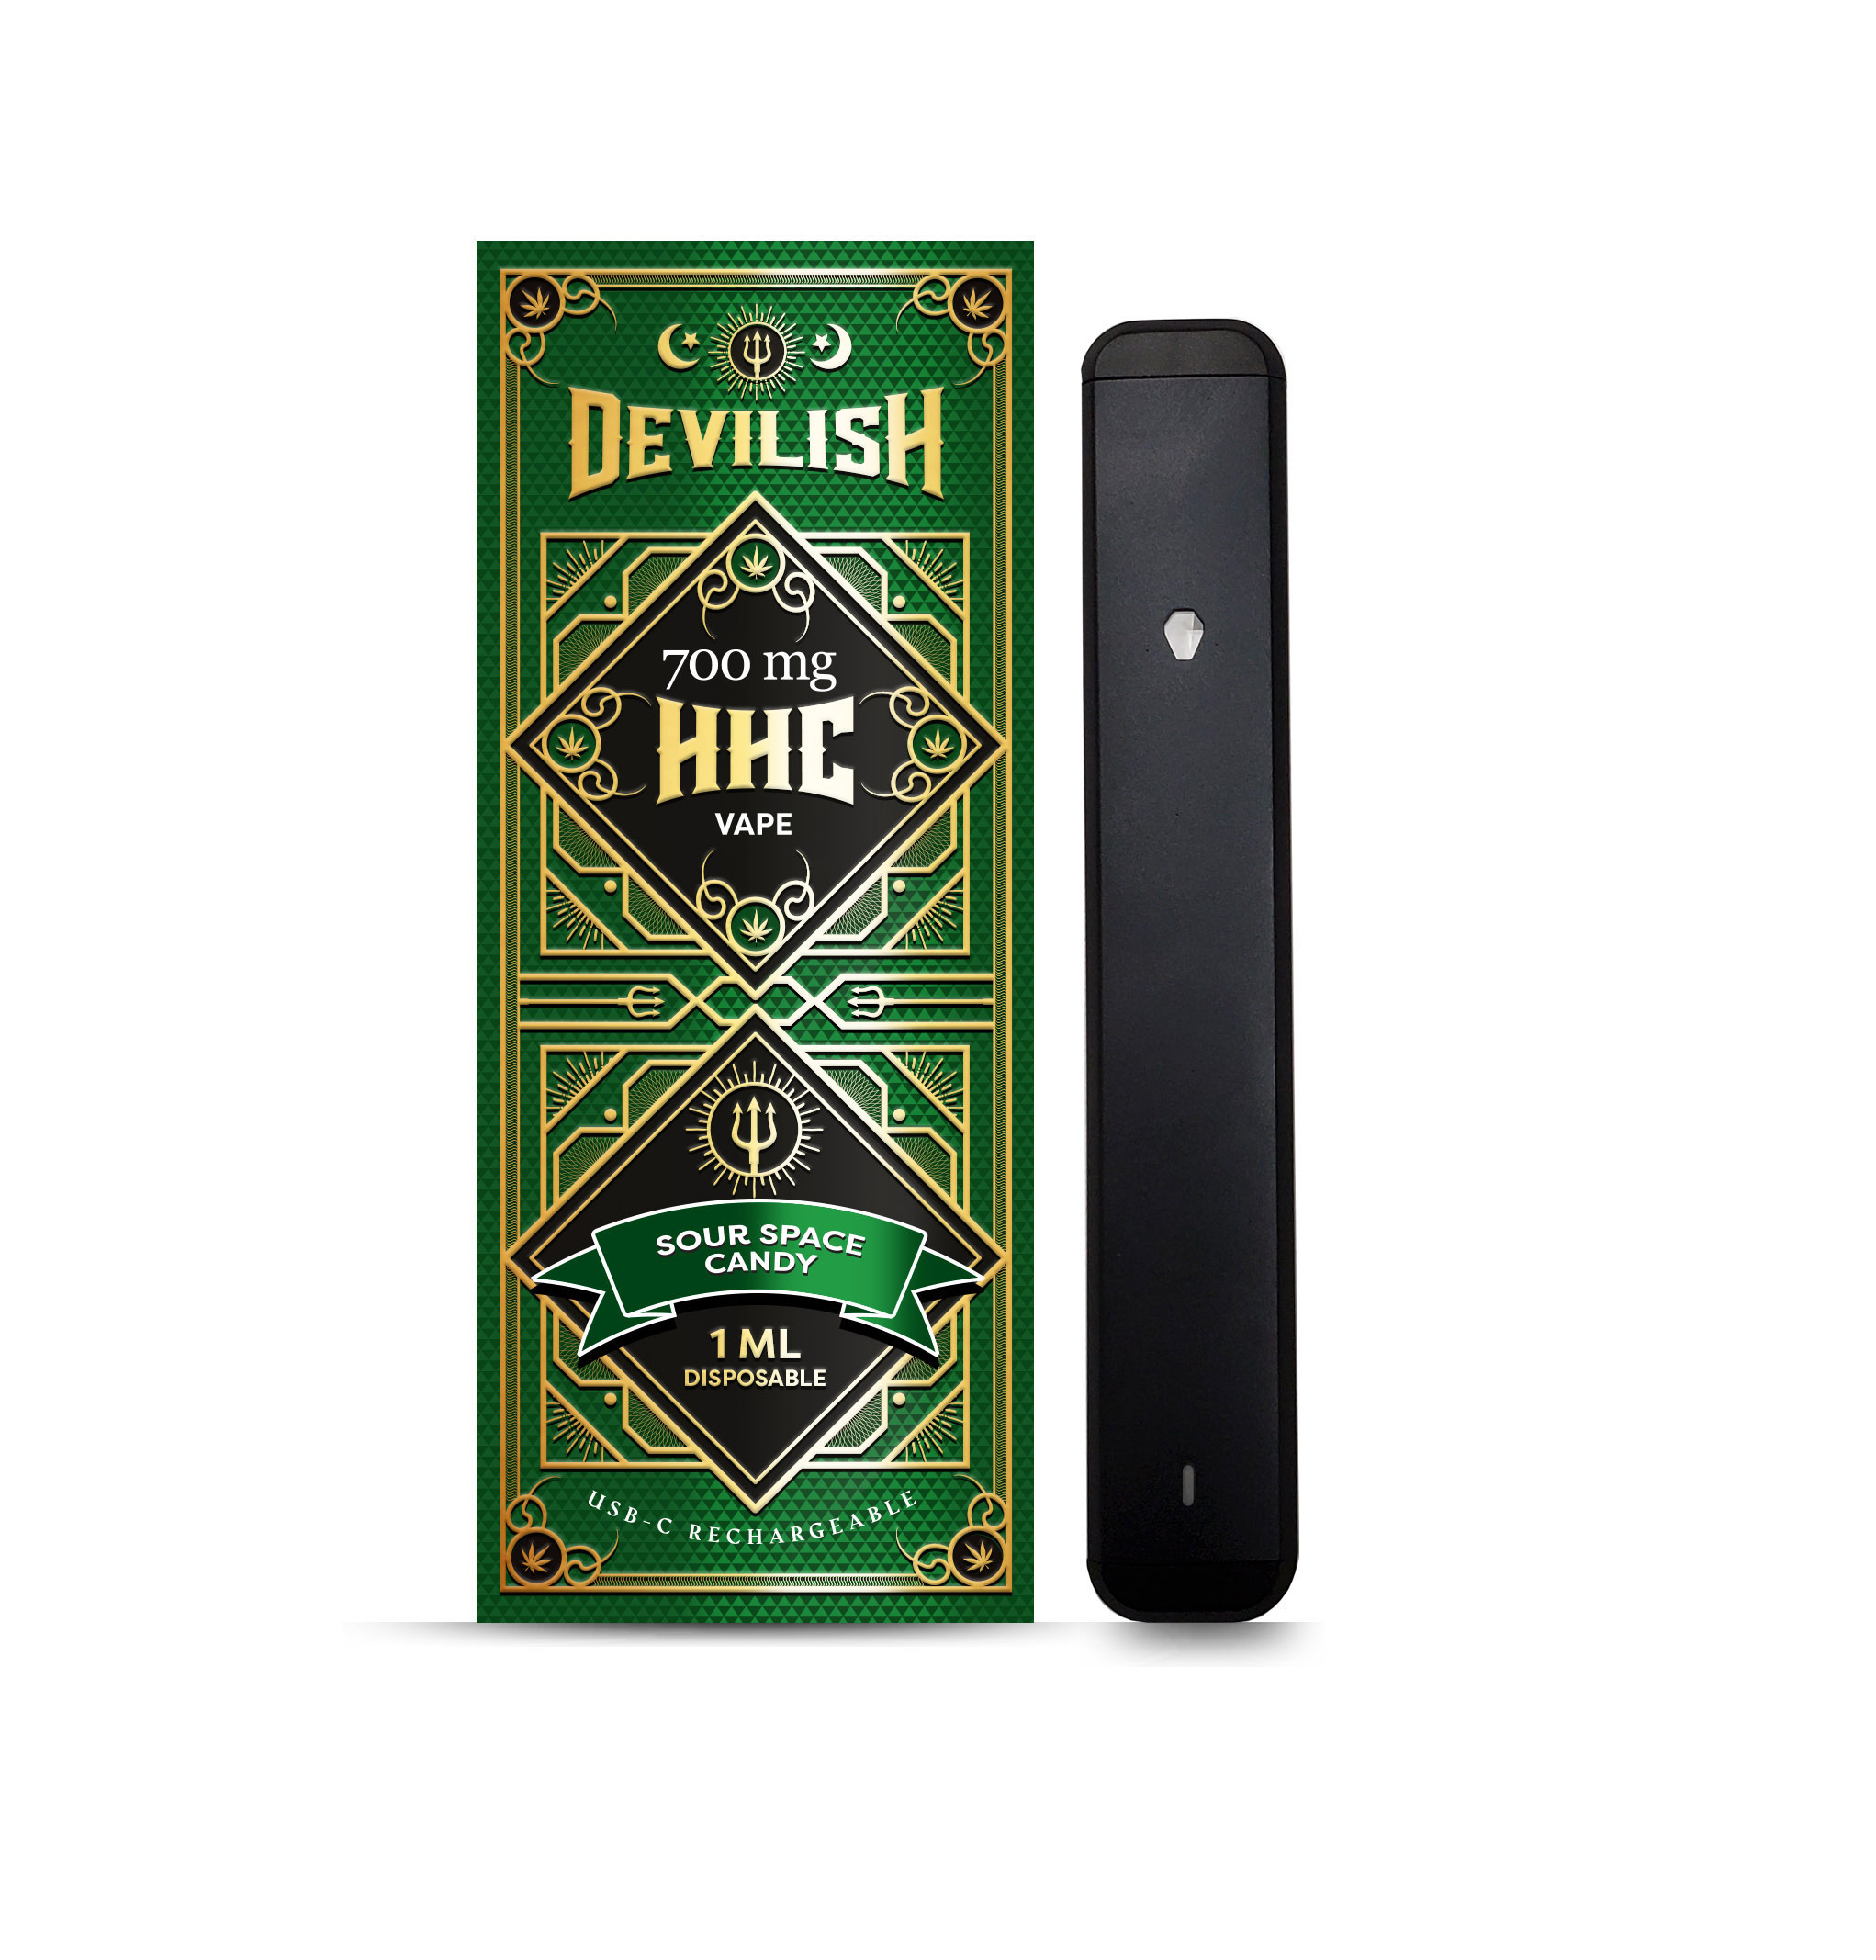 Devilish-700mg-HHC-Sour-Space-Candy